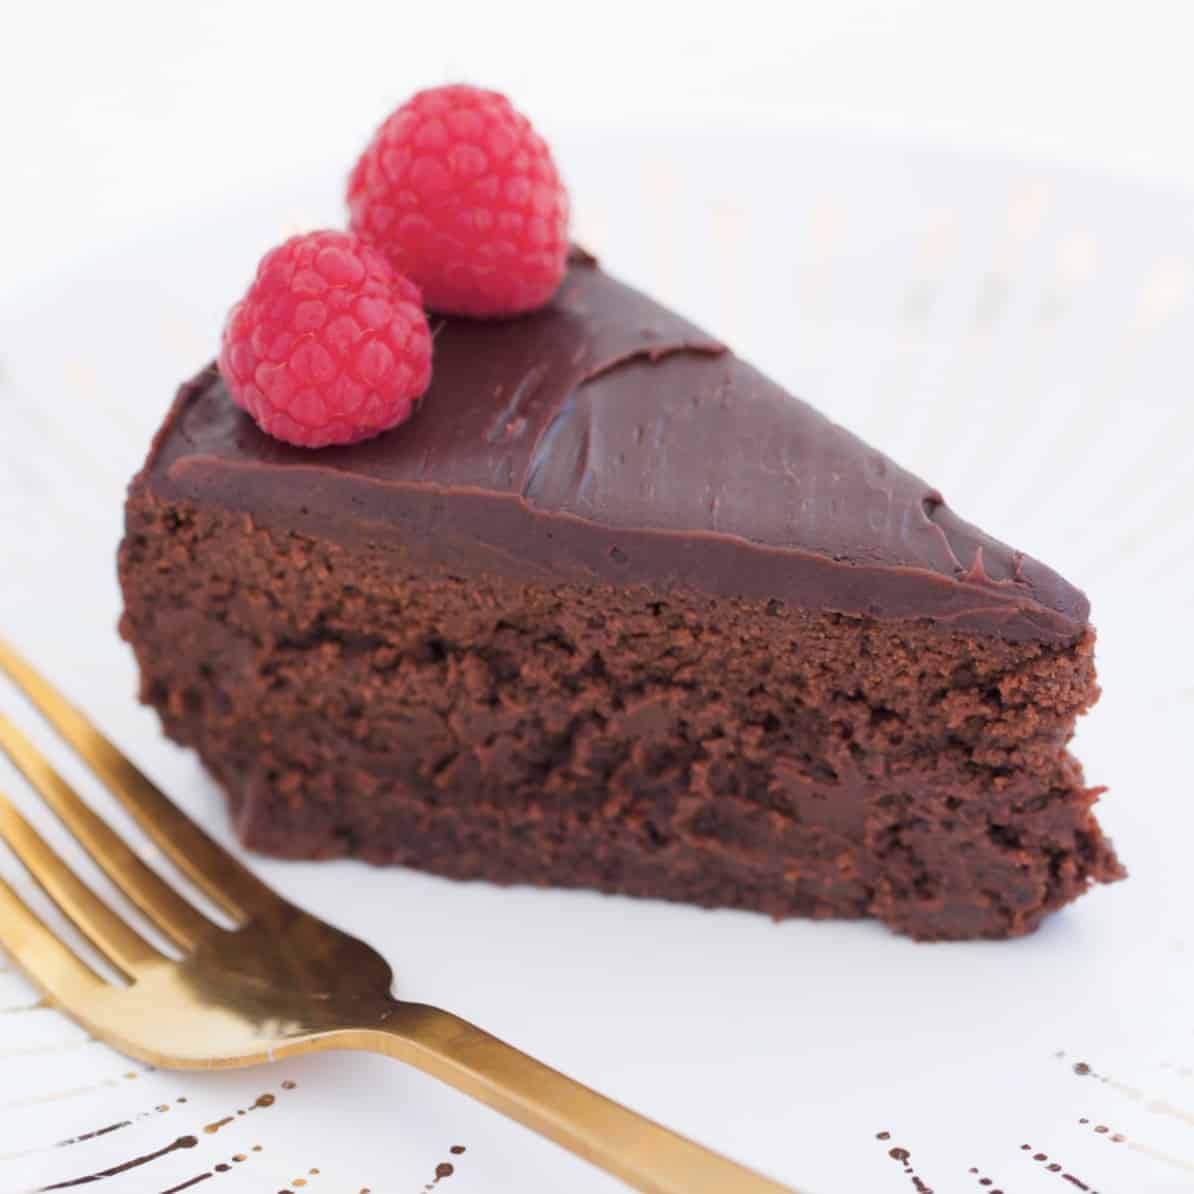 A slice of rich chocolate cake with chocolate ganache and raspberries.